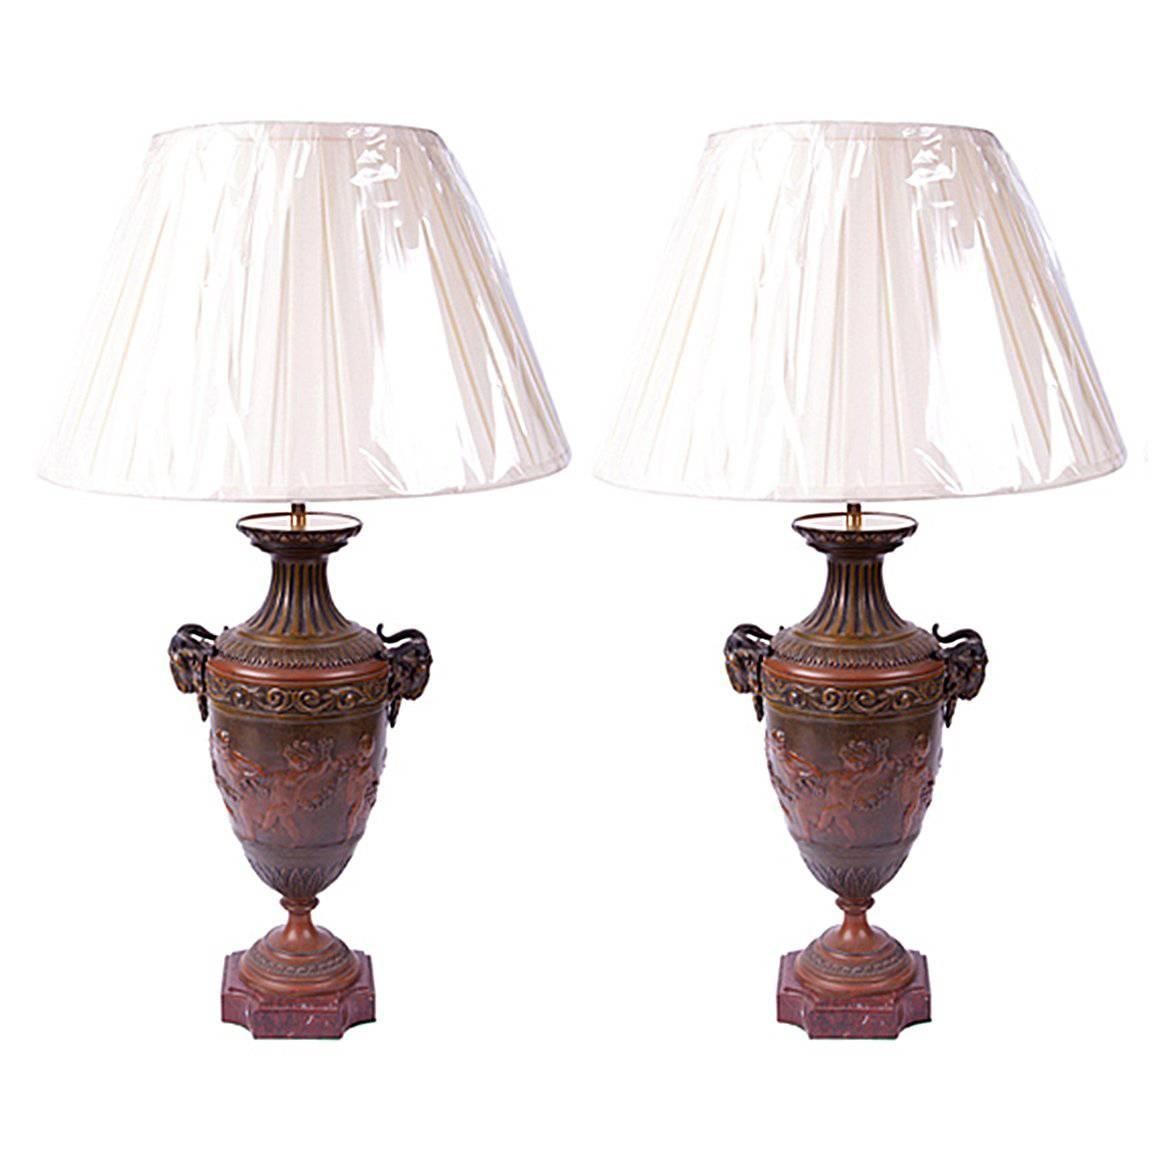 Pair of Early 19th Century French Empire Neoclassical Bronze Urns Wired as Lamps